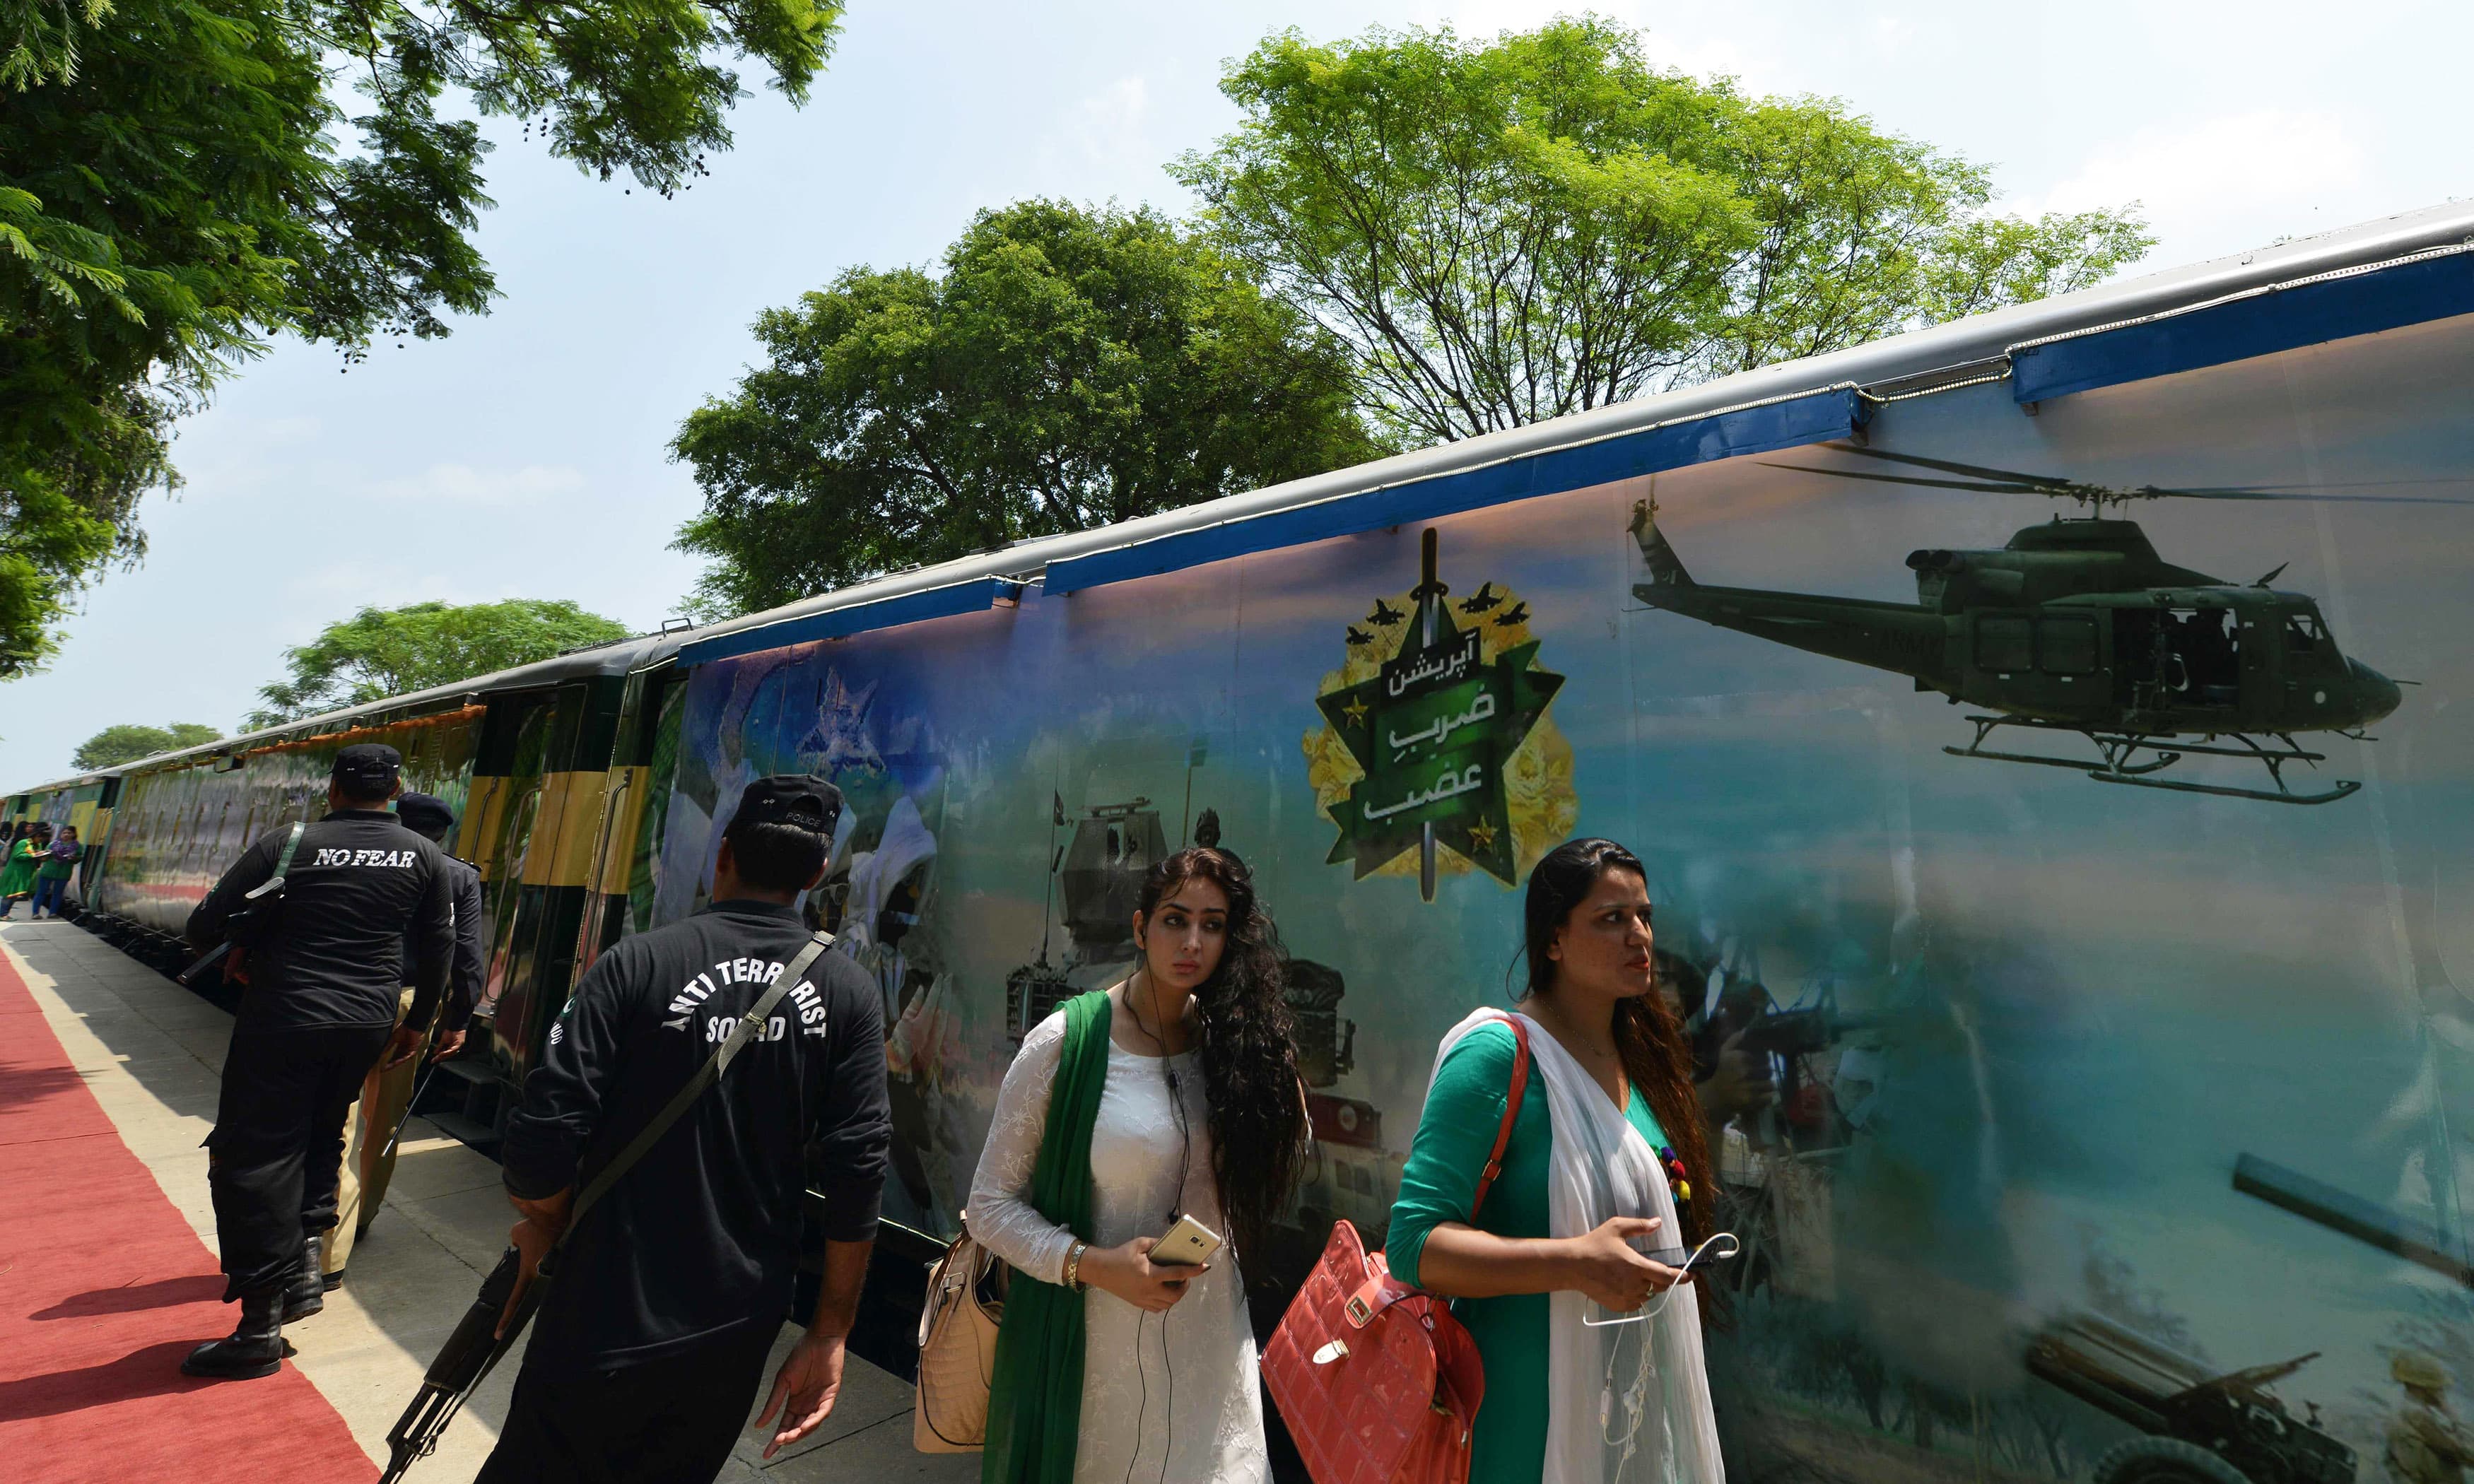 Pakistani policemen and residents walk past carriages of the 'Azadi Train' (Independence Train)before its journey from Margalla Railway Station in Islamabad on August 11, 2016, ahead of Independence Day celebrations. The train consists of coaches representing the culture and traditions of all four provinces of Pakistan and Pakistan-administered Kashmir and is scheduled to cover some 4,000 kms in a journey of a month which will culminate in the port city of Karachi. Pakistan celebrates the 69th anniversary of the country's independence from British rule on August 14. / AFP PHOTO / AAMIR QURESHI